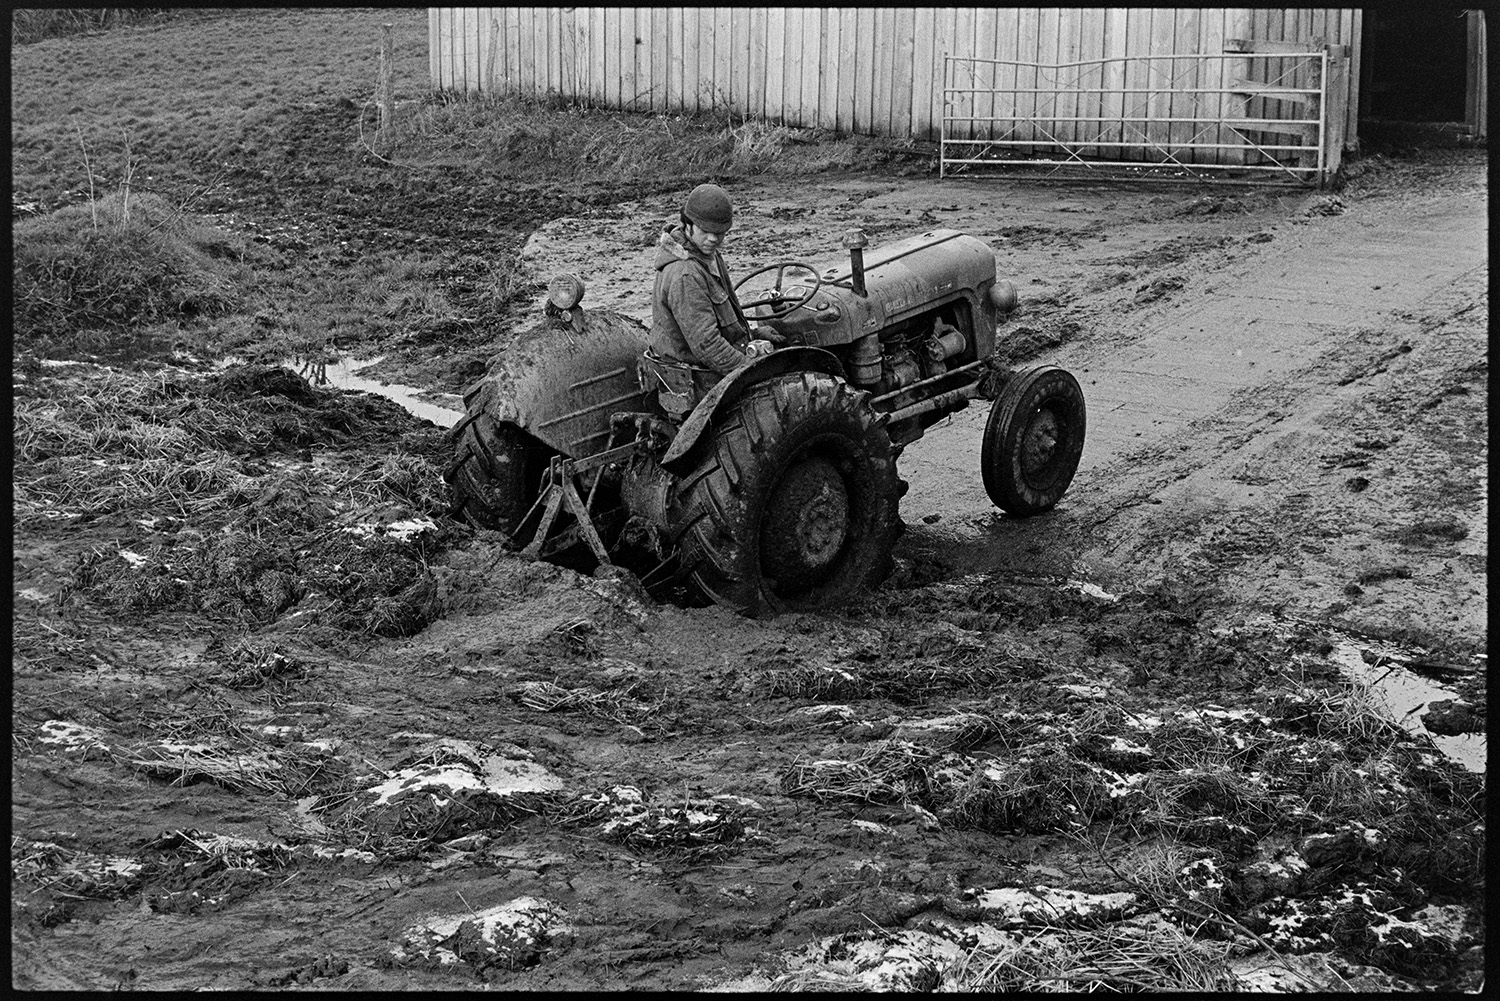 Clearing slurry with tractor and scraper.
[Graham Ward or David Ward on tractor fitted with a scraper pushing slurry into a slurry heap at Parsonage, Iddesleigh.]